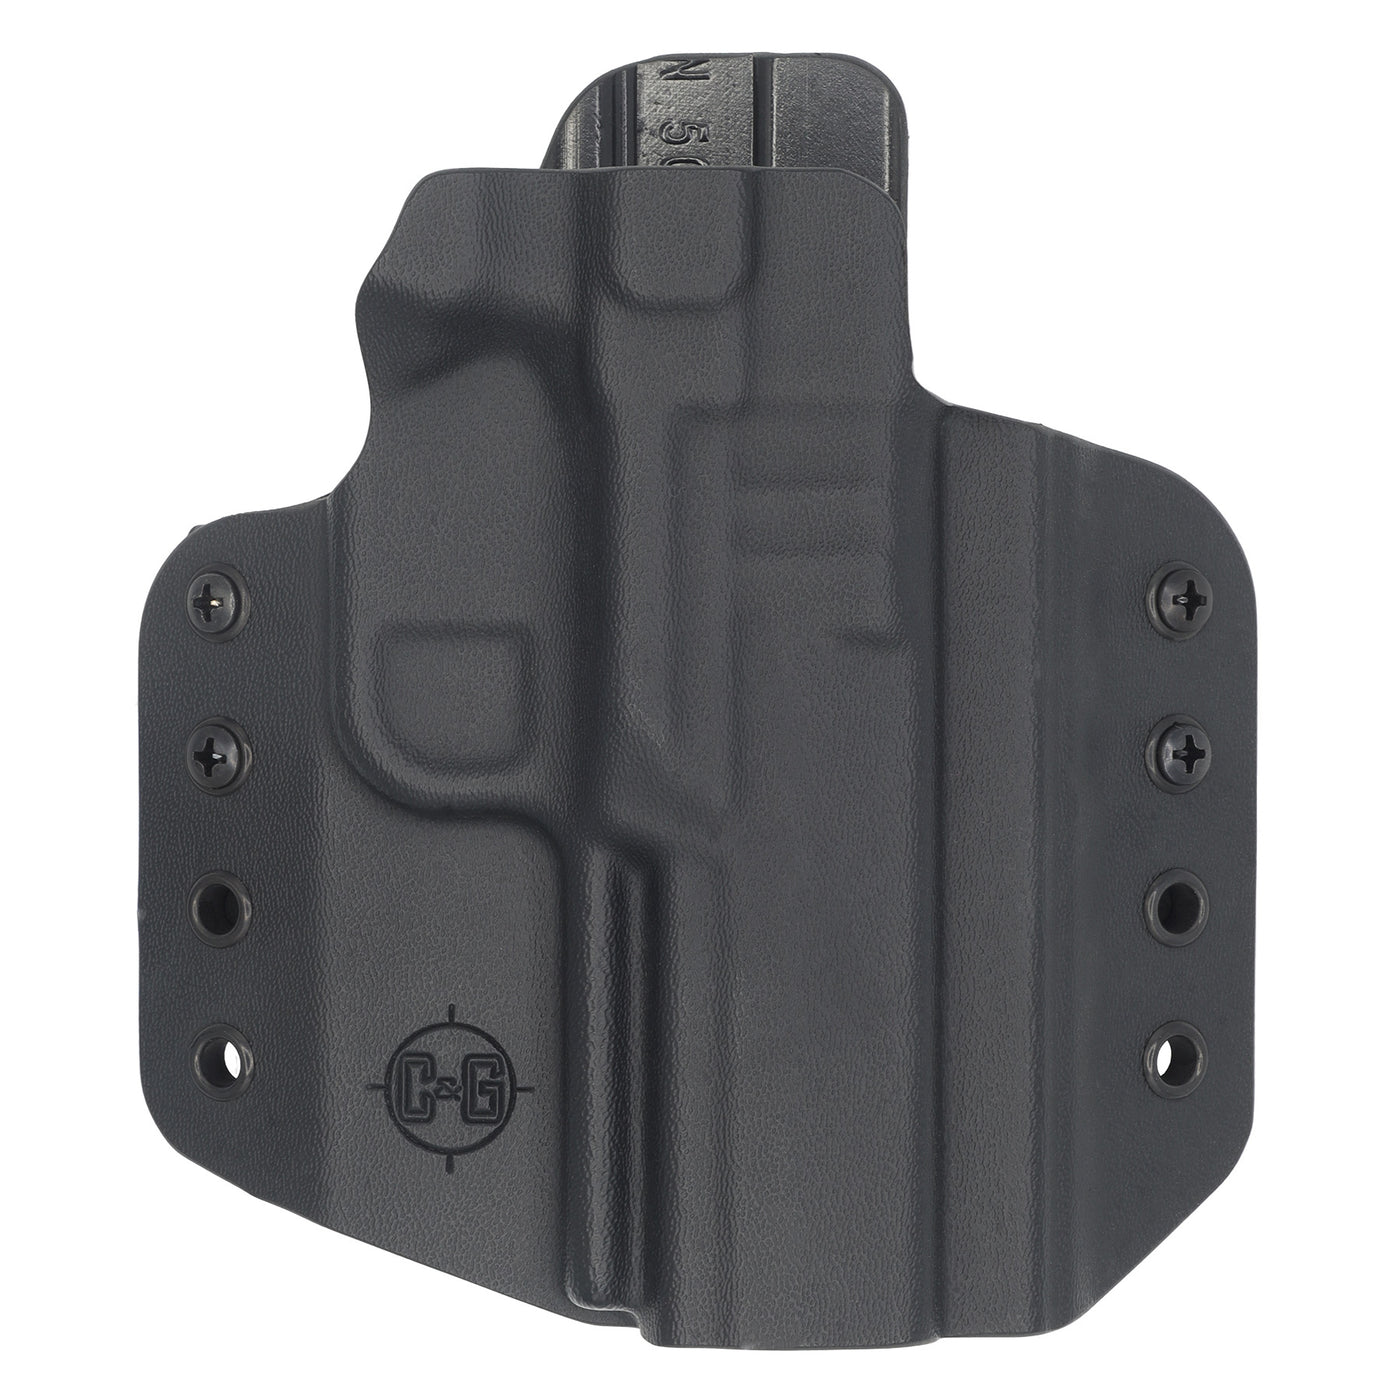 This is the C&G Holsters outside the waistband holster for the FN 509T (Tactical) in black for a right handed shooter.